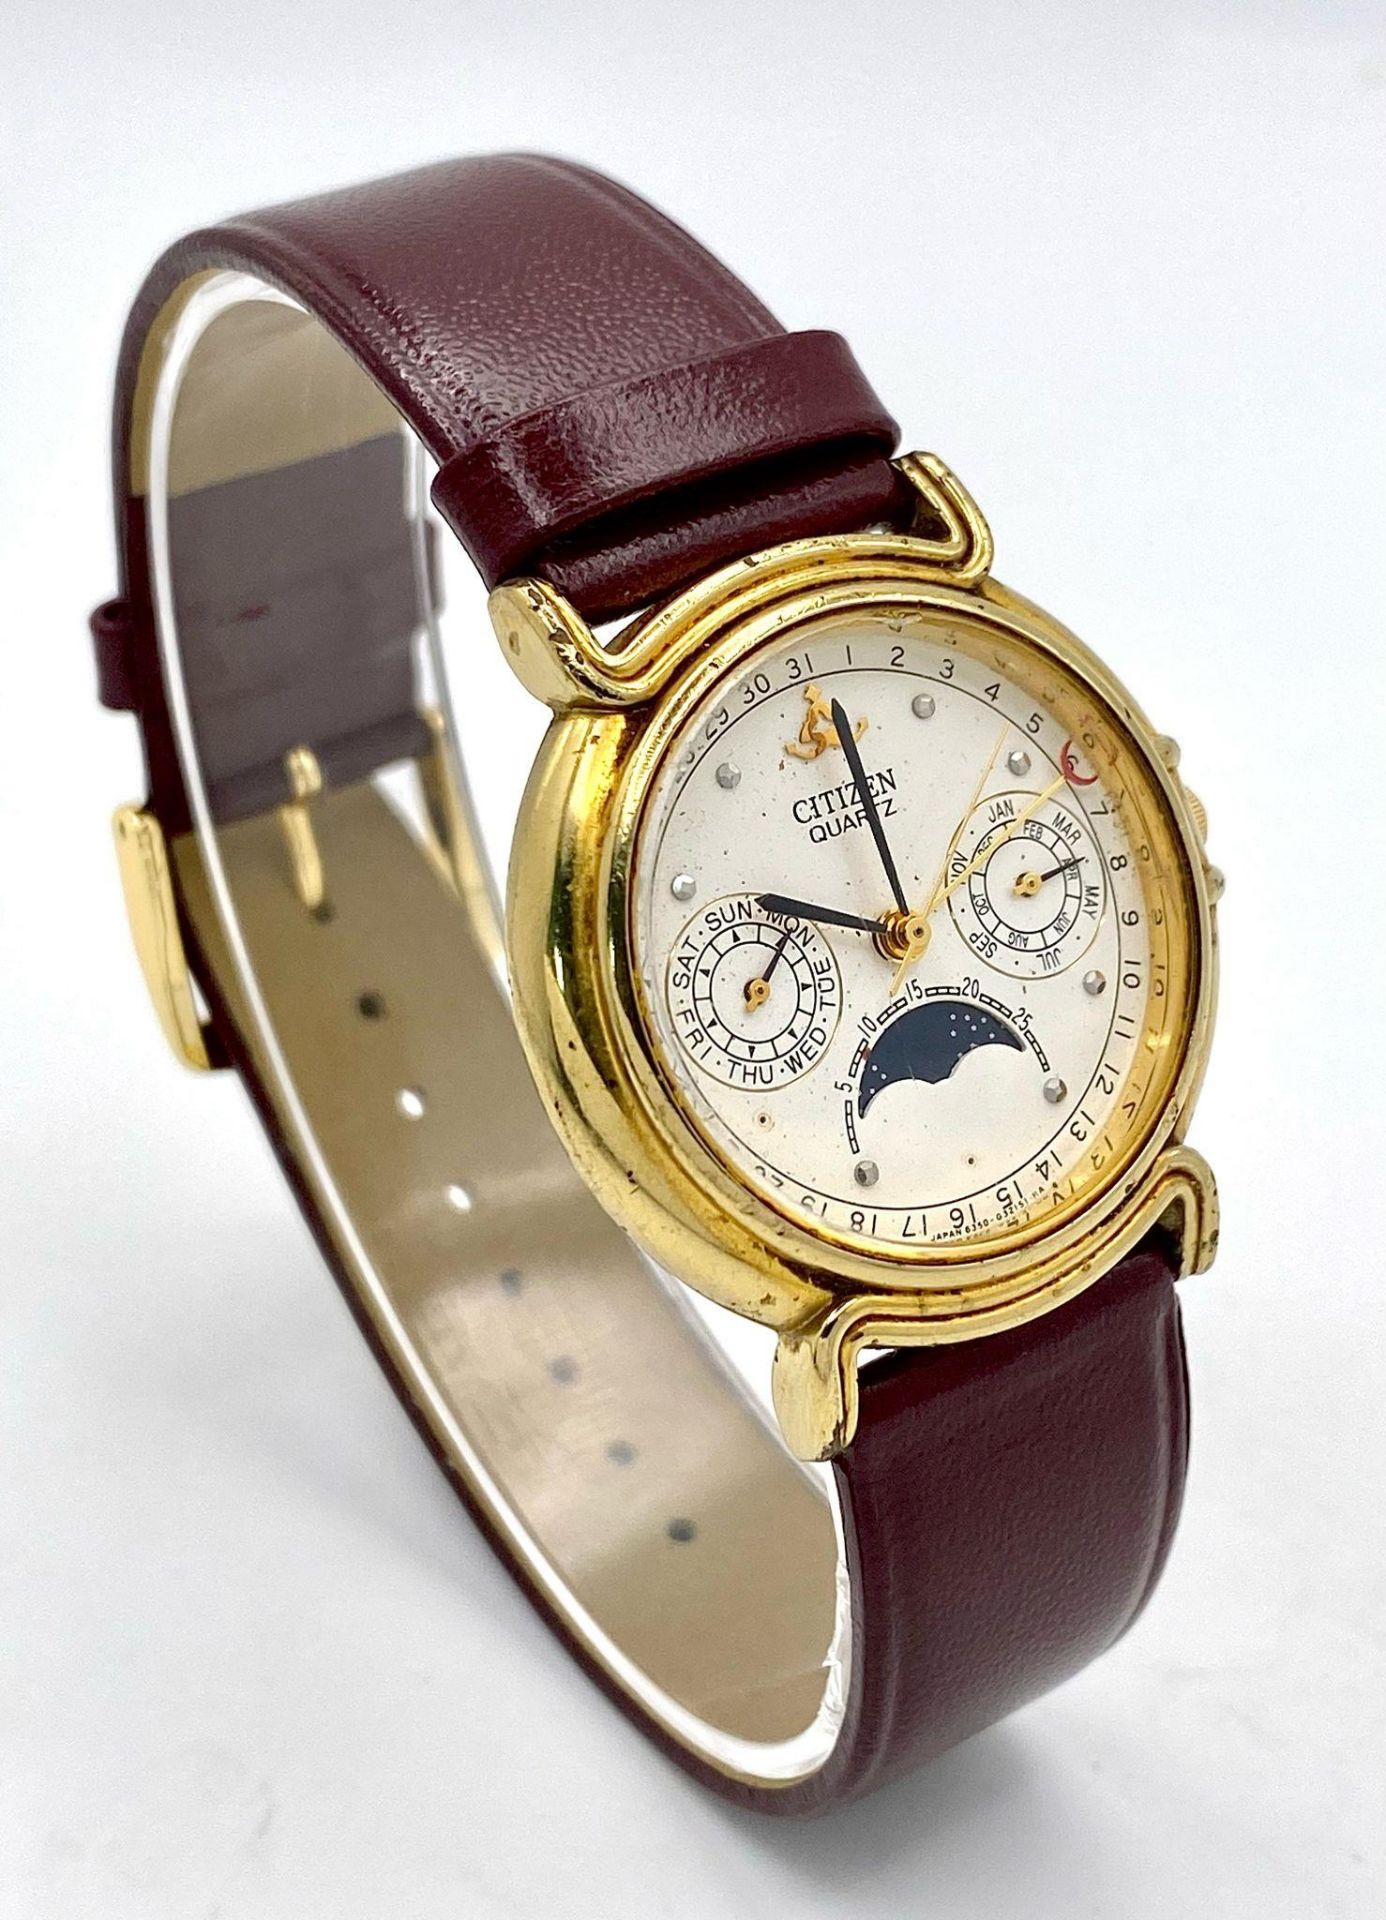 A Citizen Quartz Moonphase Unisex Watch. Burgundy leather strap. Gilded case - 33mm. In working - Image 7 of 7